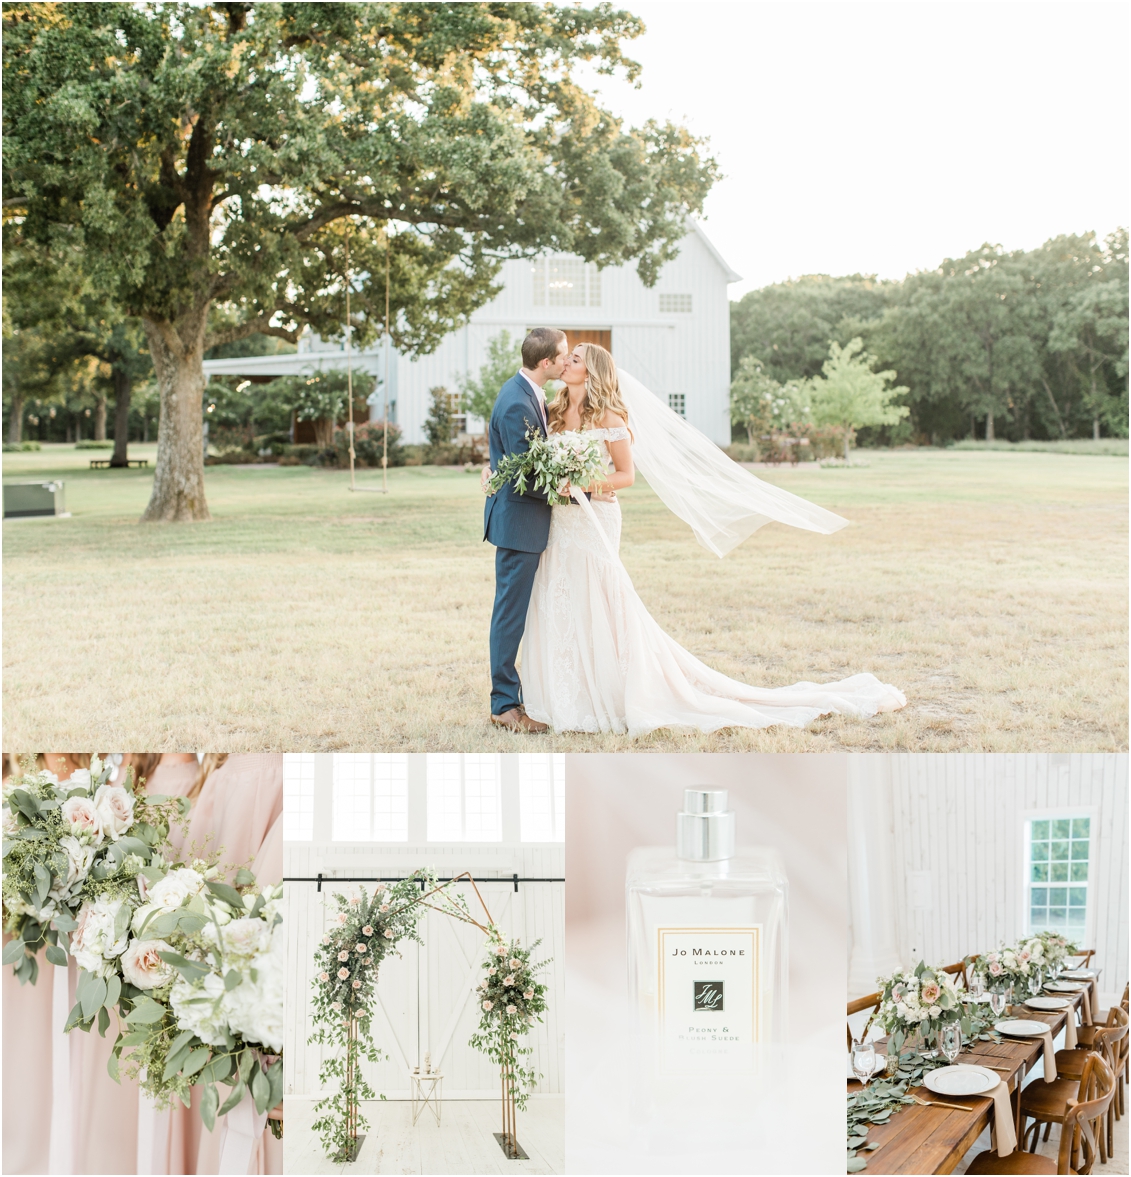 Wedding at the White Sparrow Barn